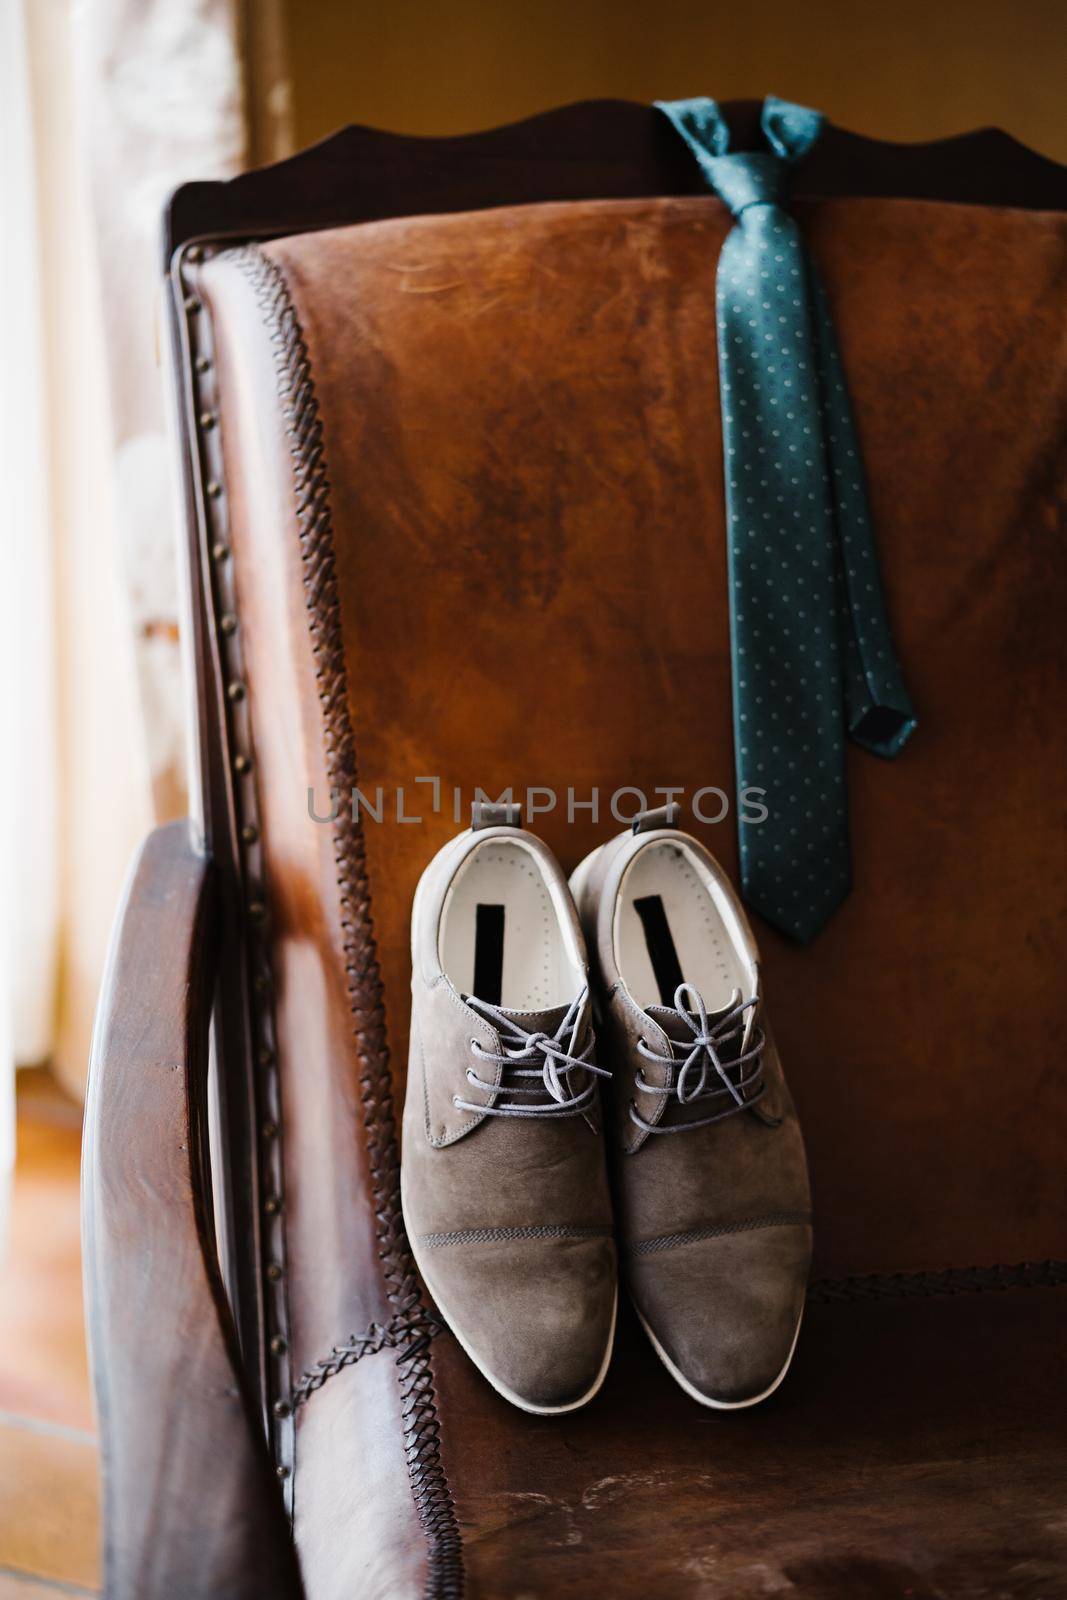 Groom's shoes and polka dot tie on a leather chair in the room. High quality photo